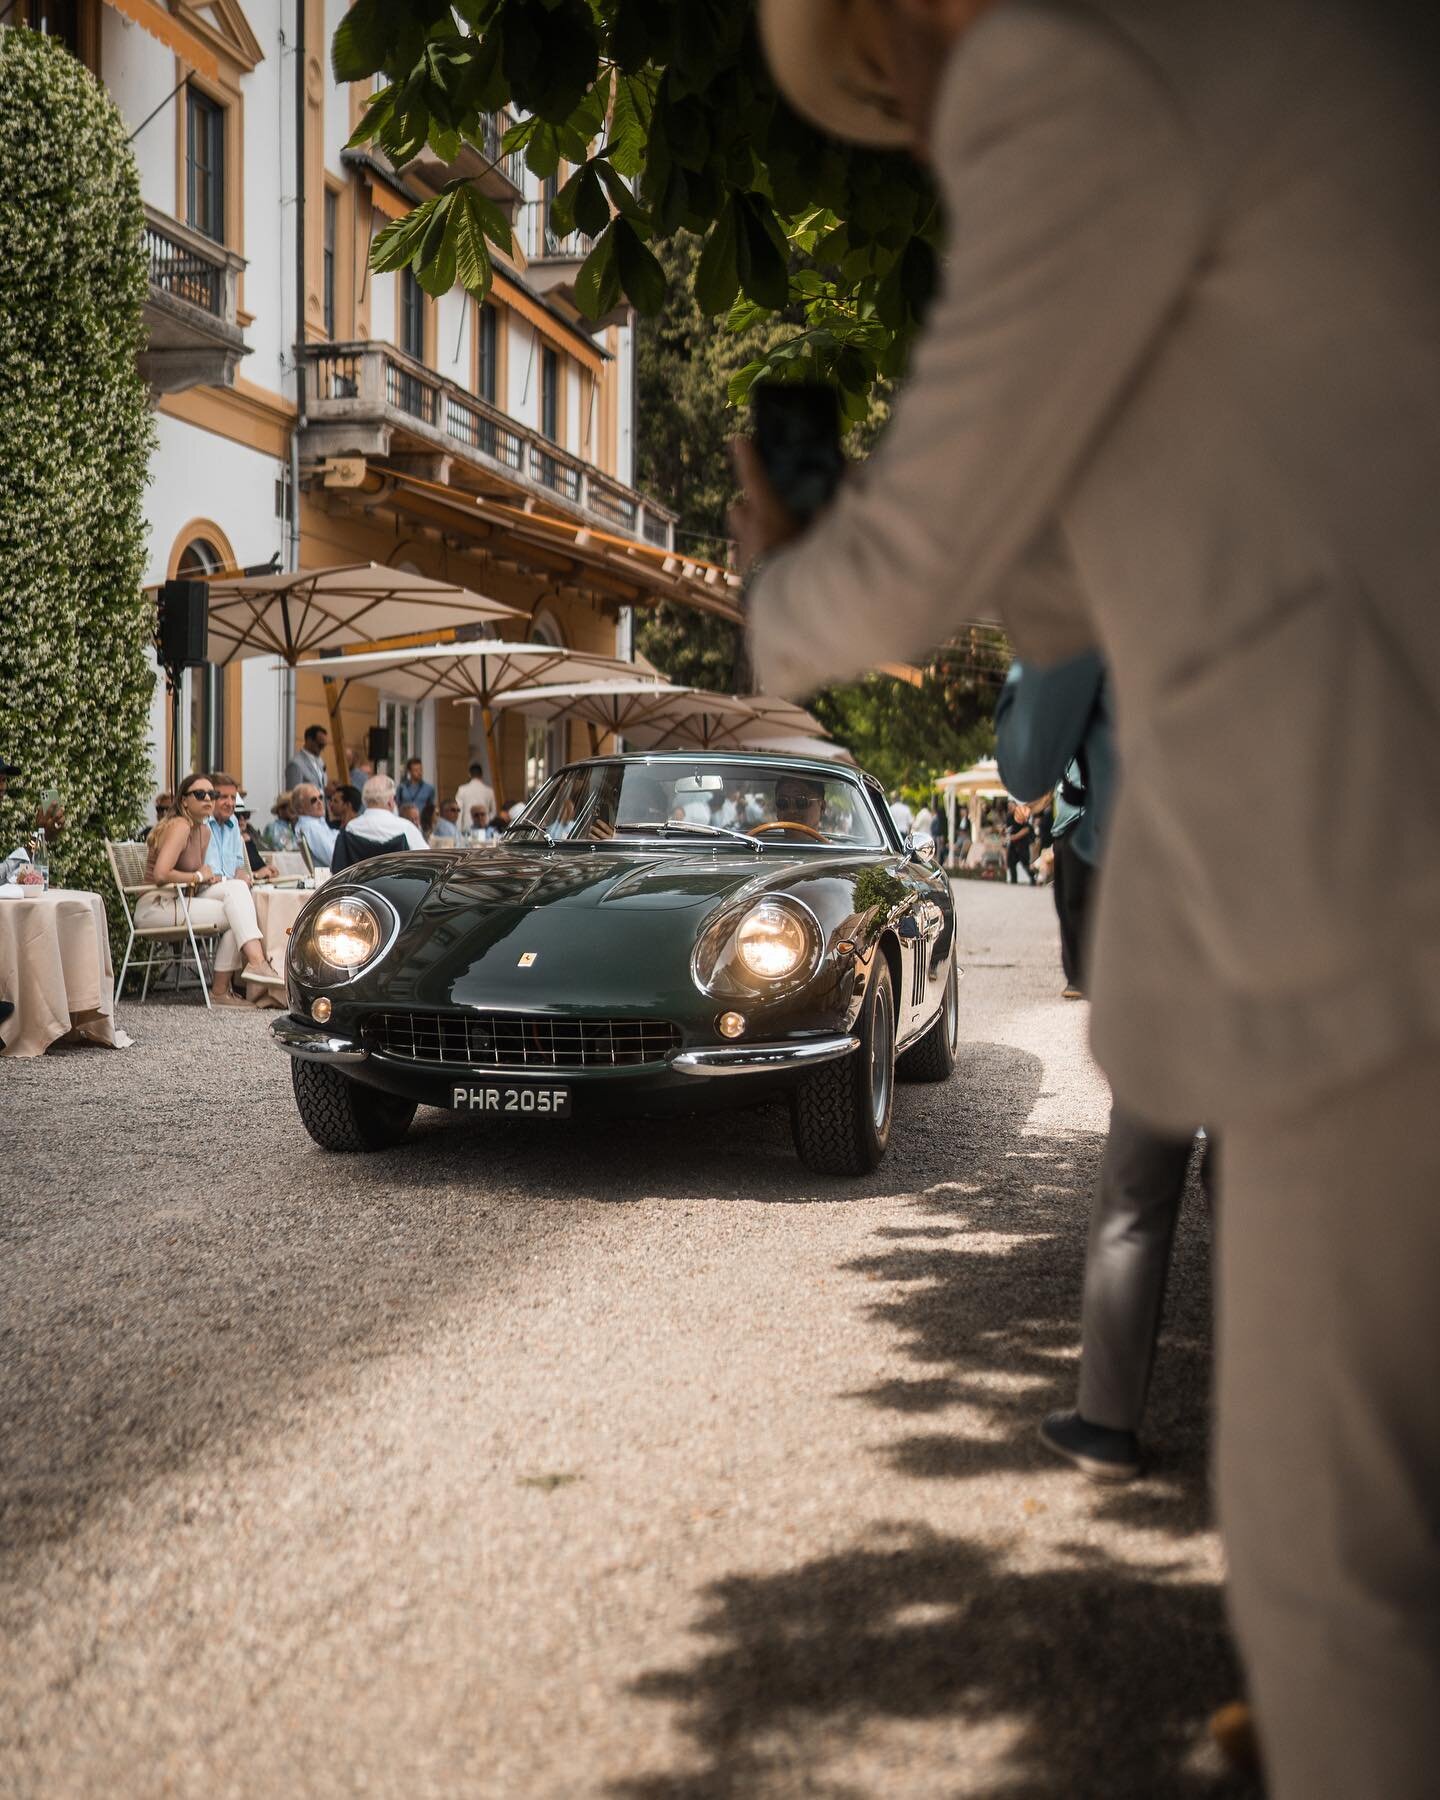 Well, this is the end of the Villa d&rsquo;Este series shot for @kidstonmotorcars! 

Btw can you guess which drink was it in the last pic? 

#concordodeleganza #villadeste #classiccars #elegance